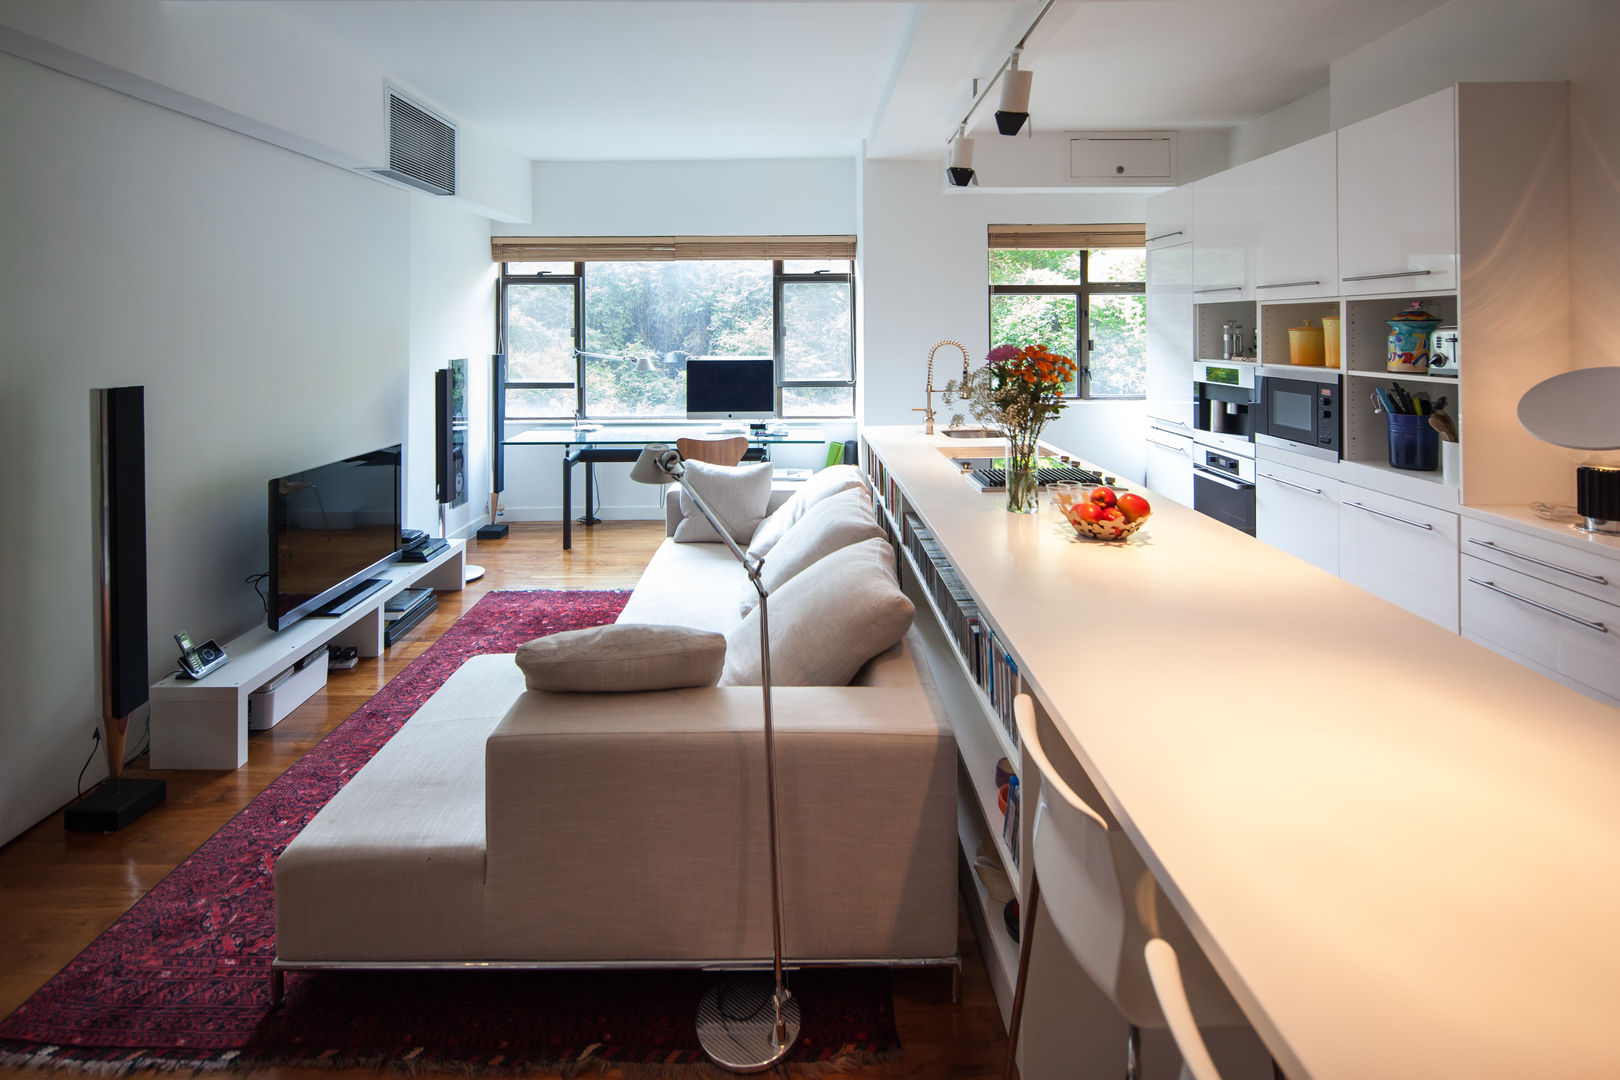 Discovery Bay Flat, HK, atelier blur / georges hung architecte d.p.l.g. atelier blur / georges hung architecte d.p.l.g. Modern living room